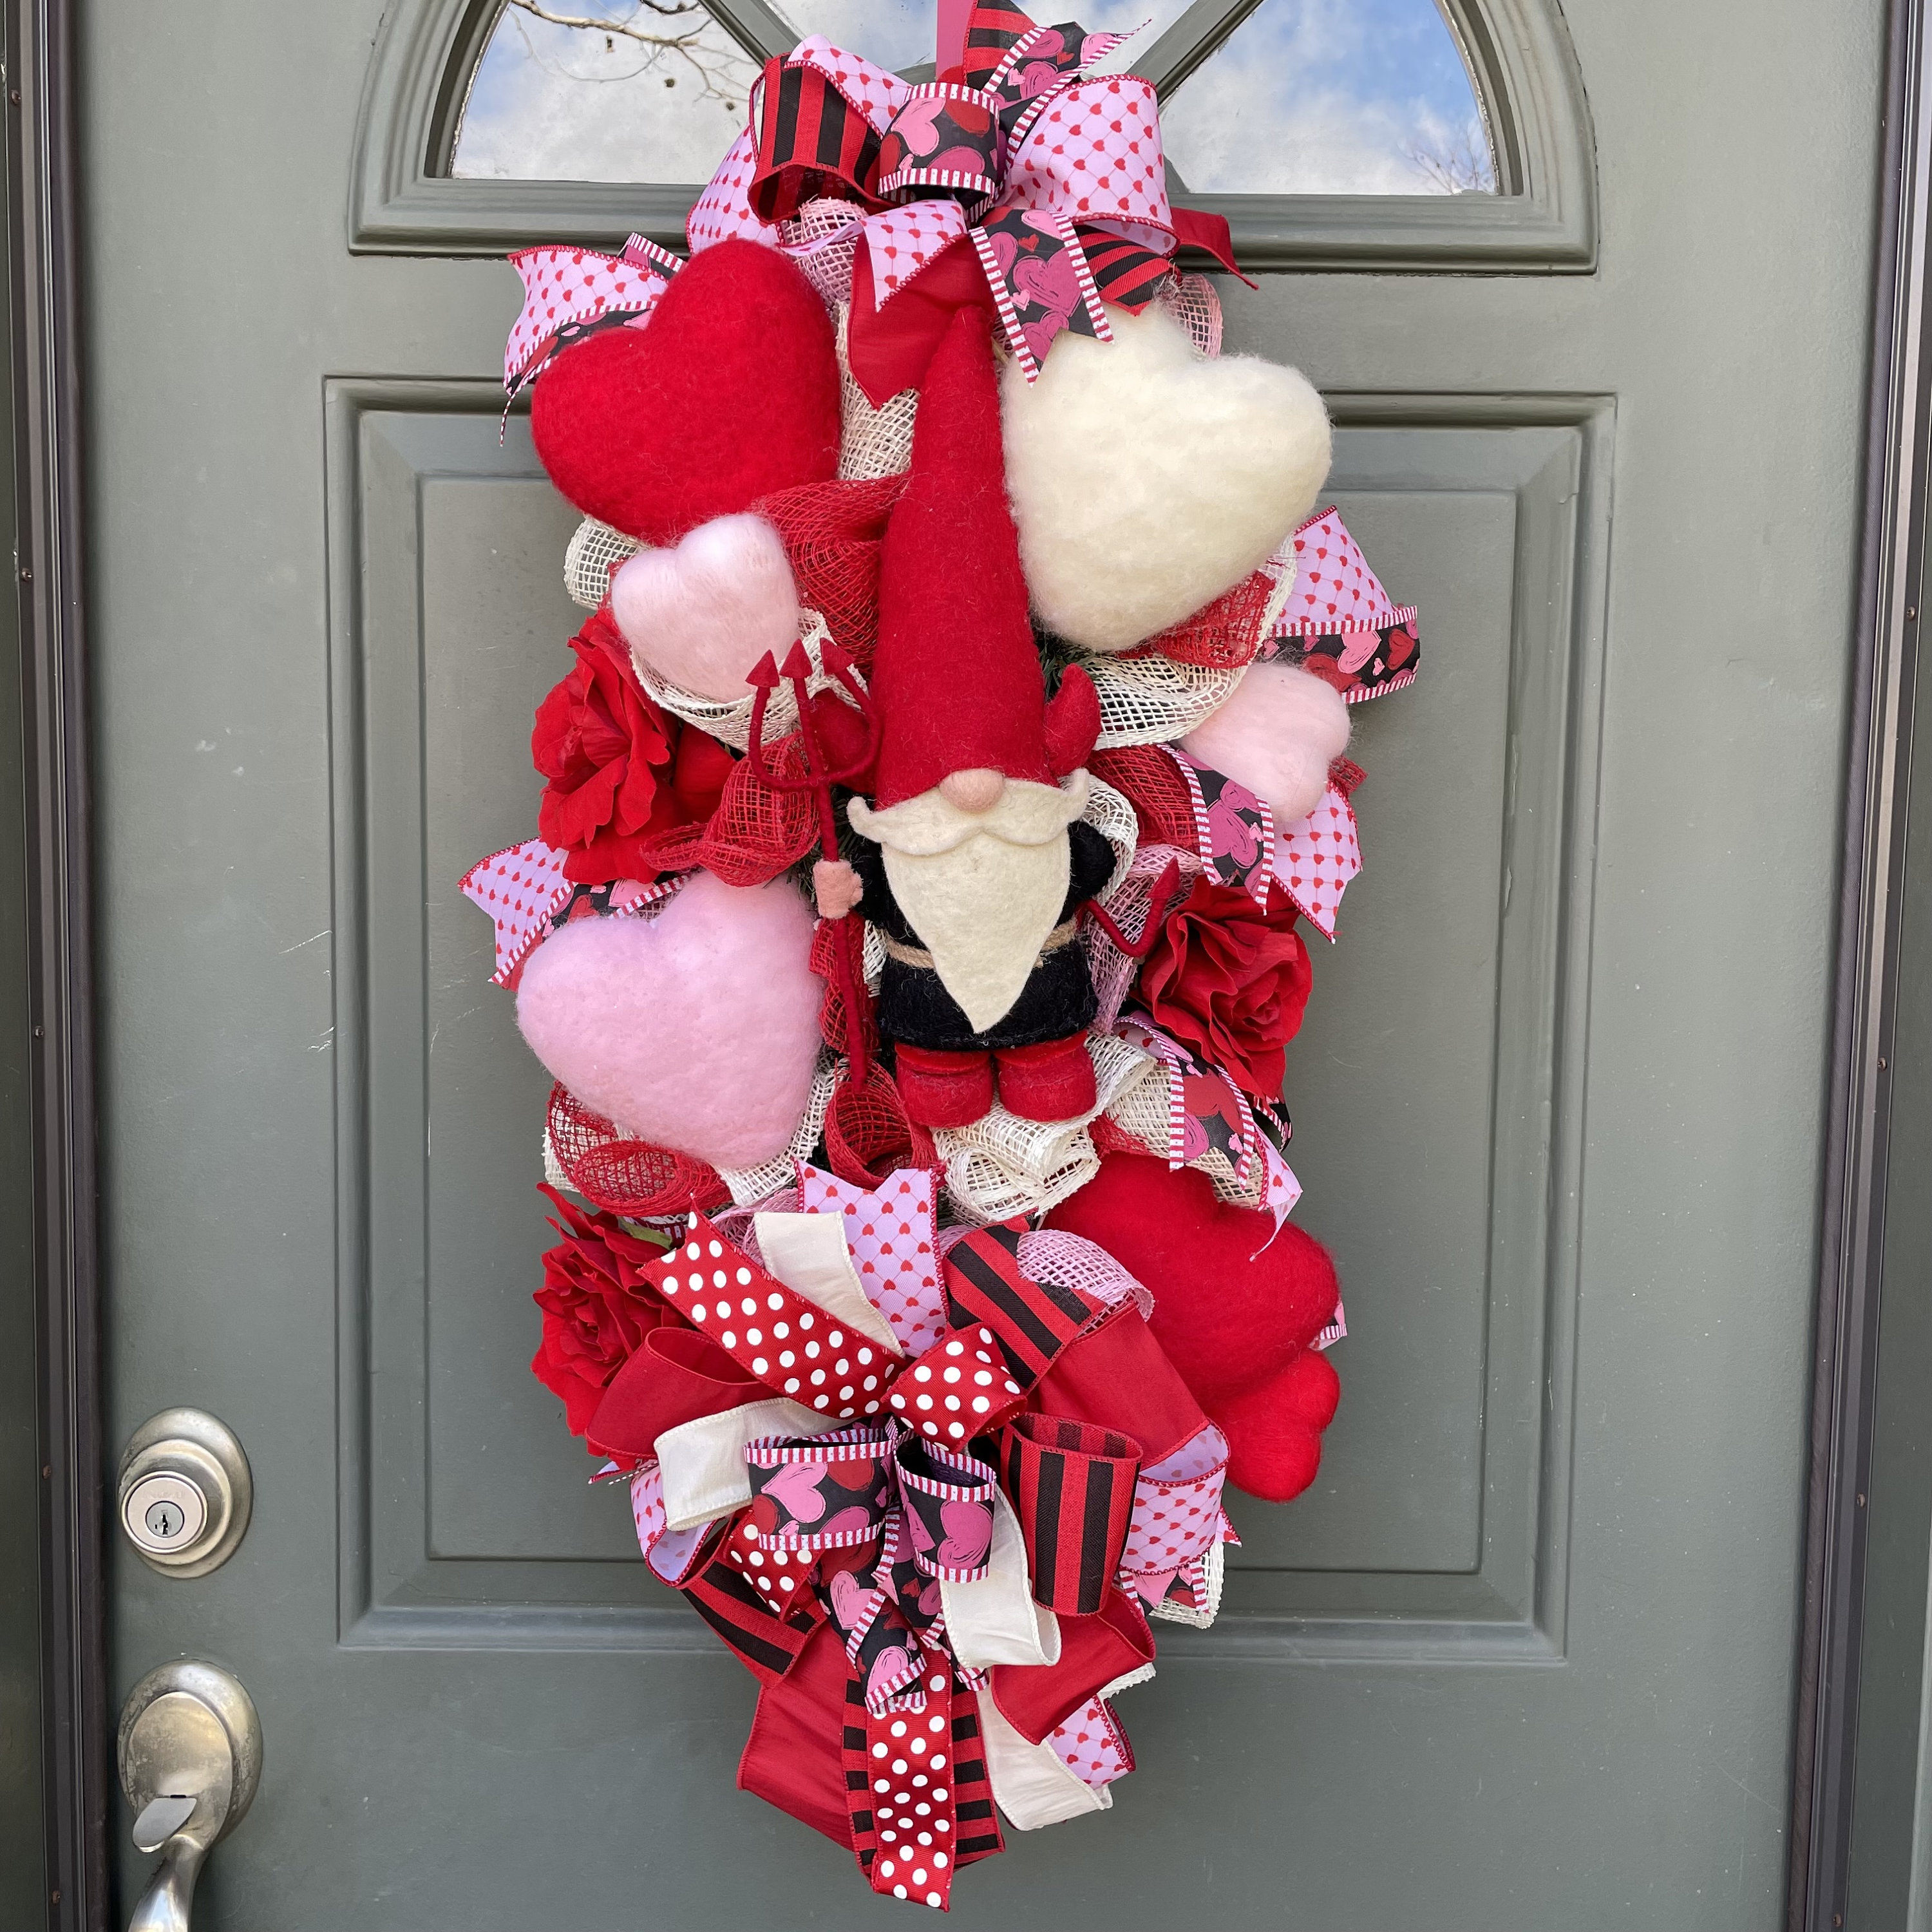 Taqqpue Valentines Wreaths for Front Door,Valentine's Day Decorations Wedding Love Garland Wall Hanging Gift Faceless Doll Pendant,Home Porch